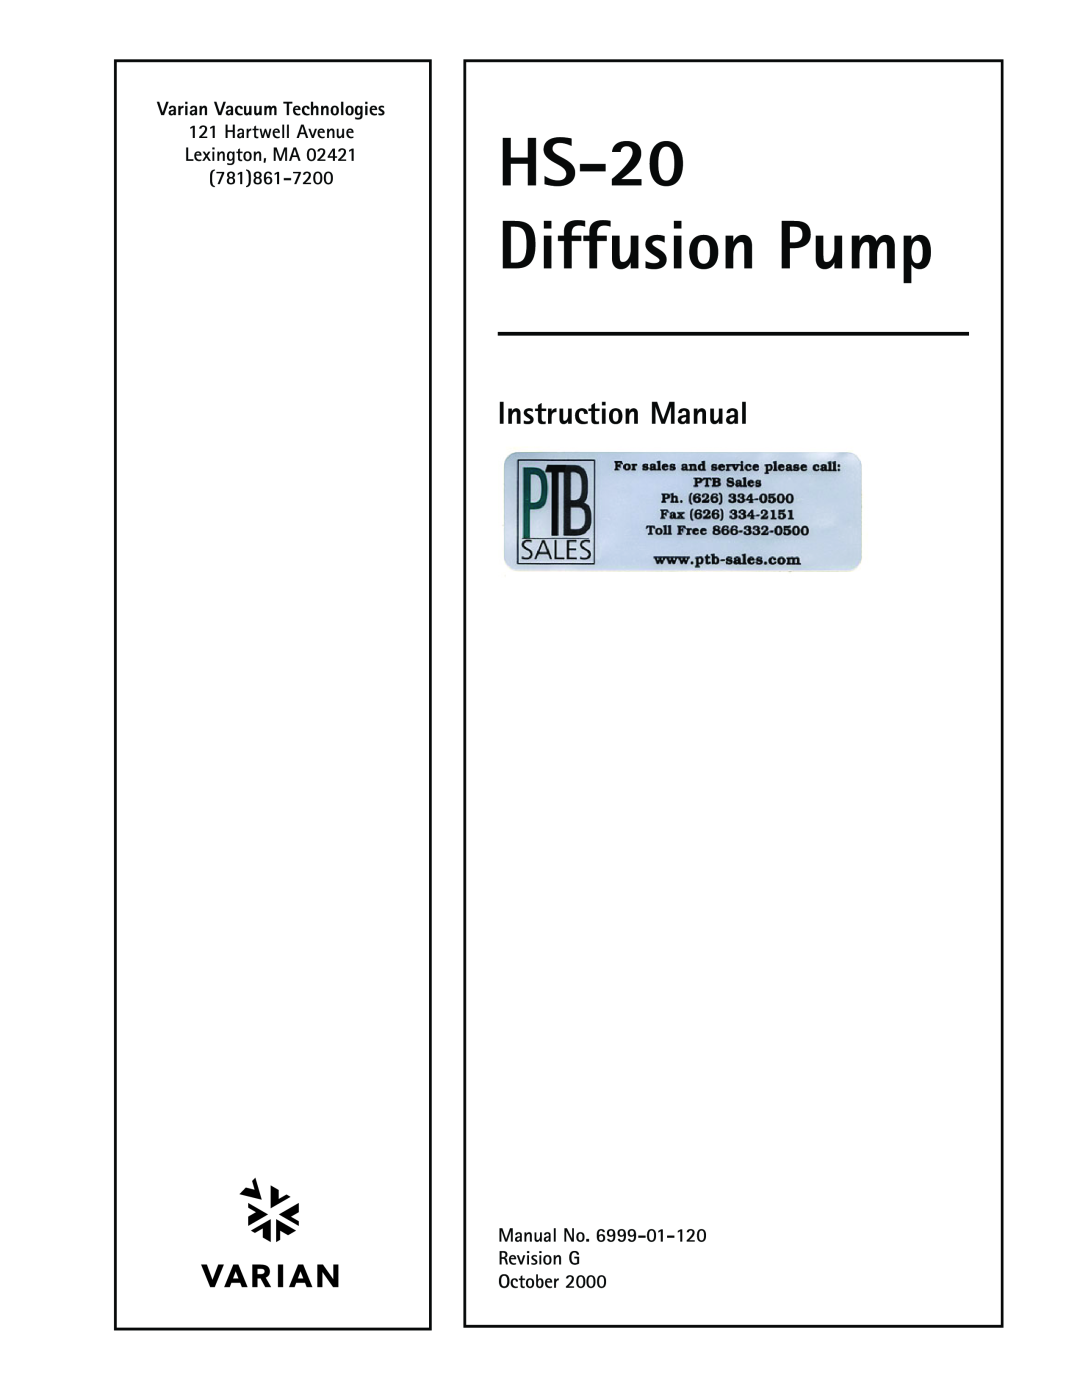 Bissell instruction manual HS-20 Diffusion Pump, Instruction Manual, 781861-7200, Manual No Revision G October 